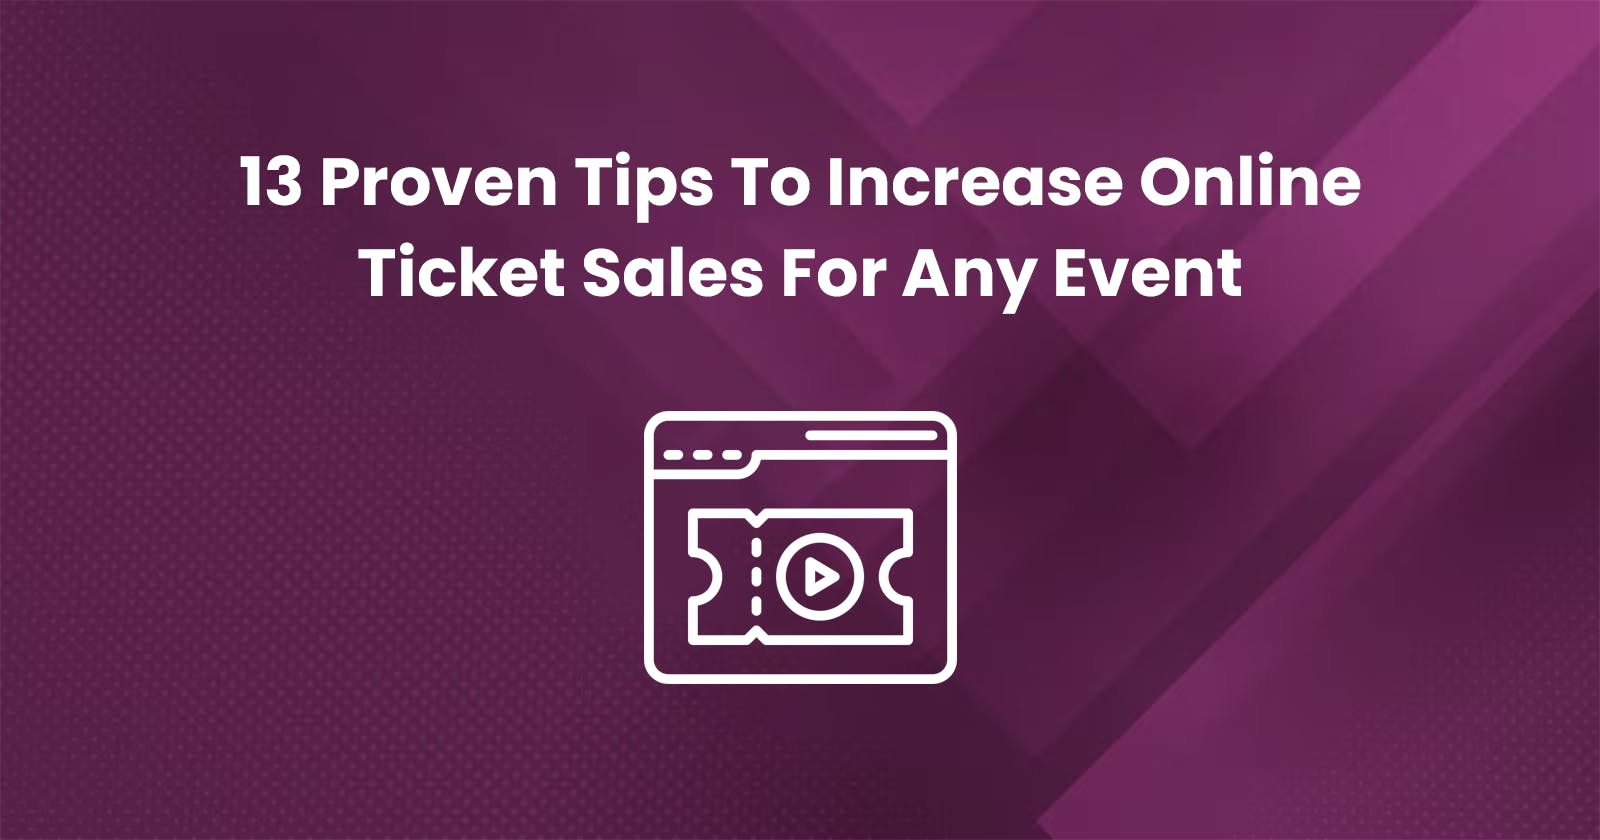 13 Proven Tips To Increase Online Ticket Sales For Any Event